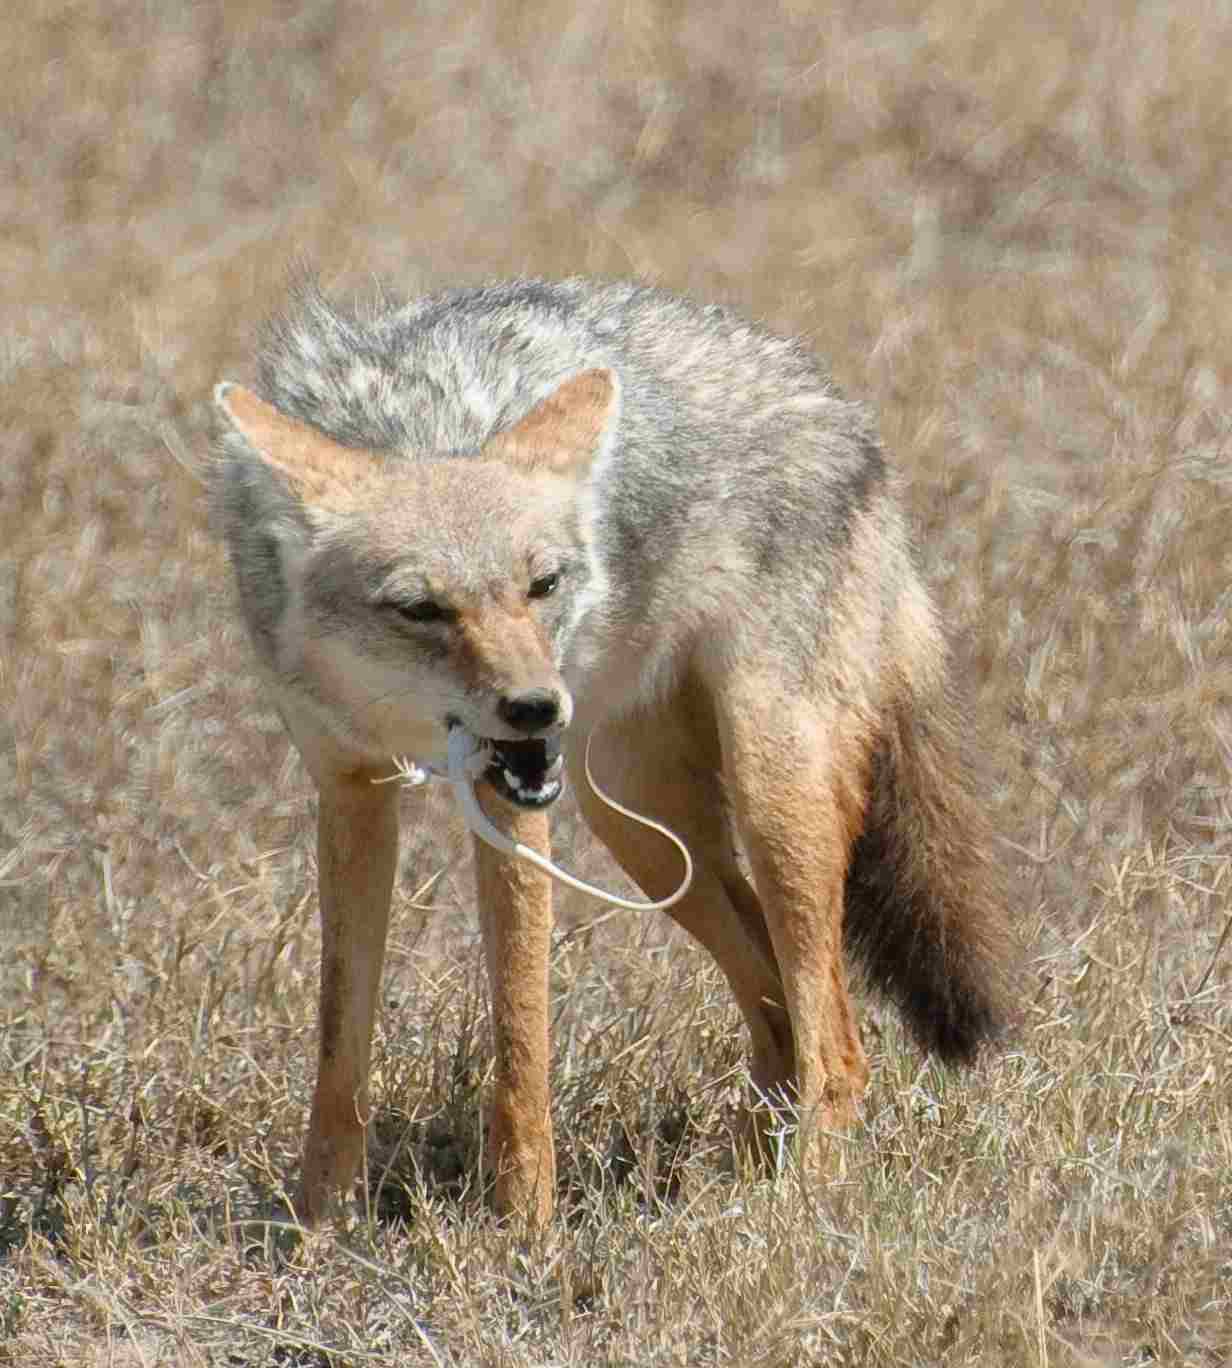 Examples of Tertiary Consumers: African Golden Wolf Preys on Secondary Consumers in the Desert Like Lizards (Credit: oliver.dodd 2013 .CC BY 2.0.)